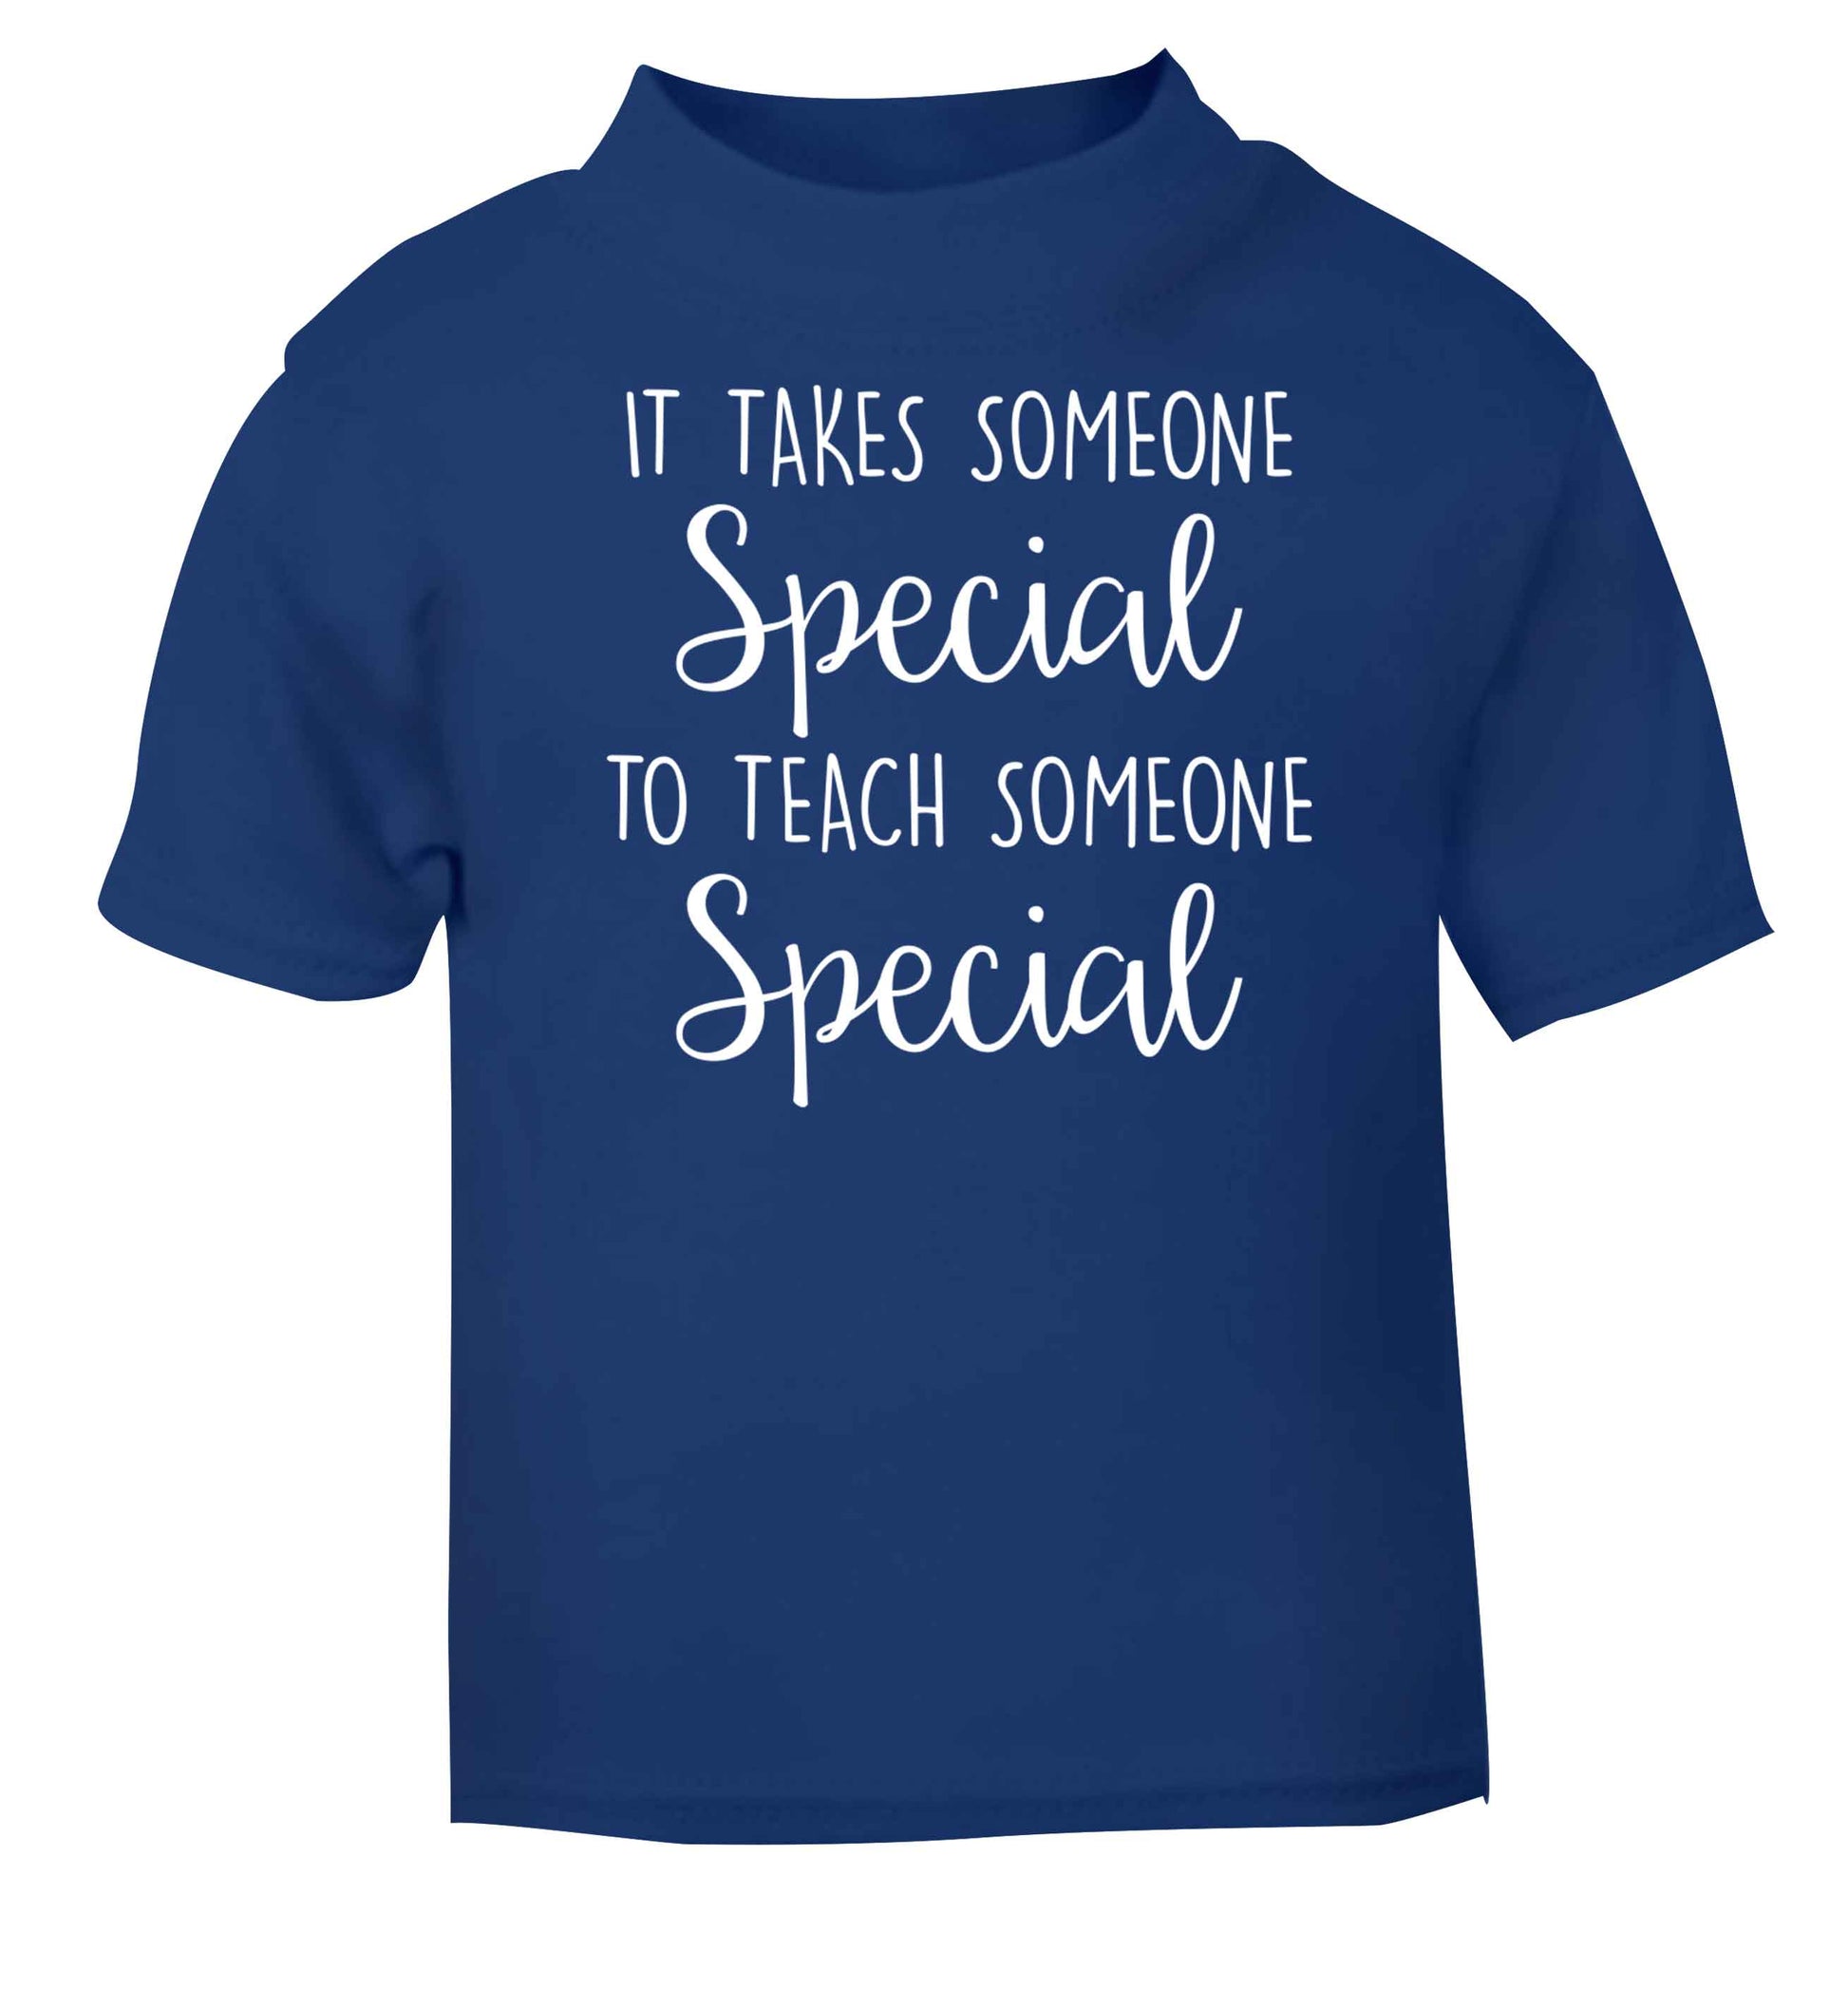 It takes someone special to teach someone special blue baby toddler Tshirt 2 Years